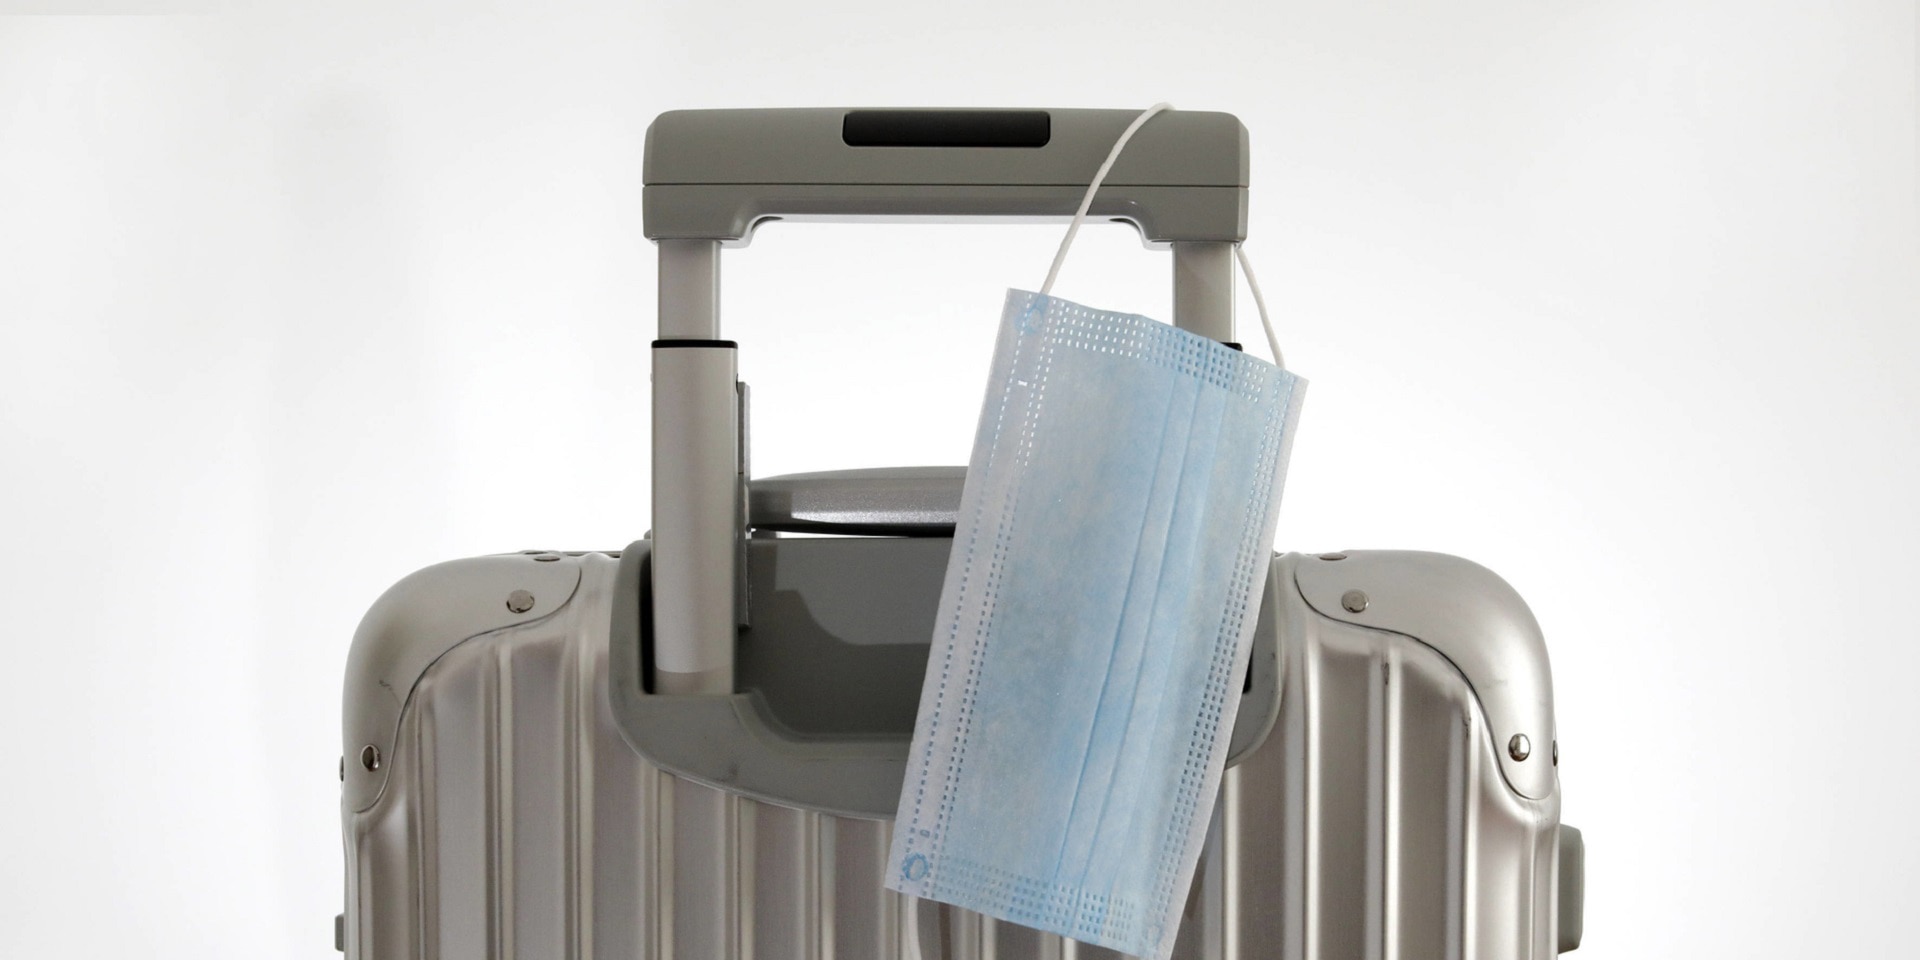 A face mask hangs on the handle of a gray suitcase.